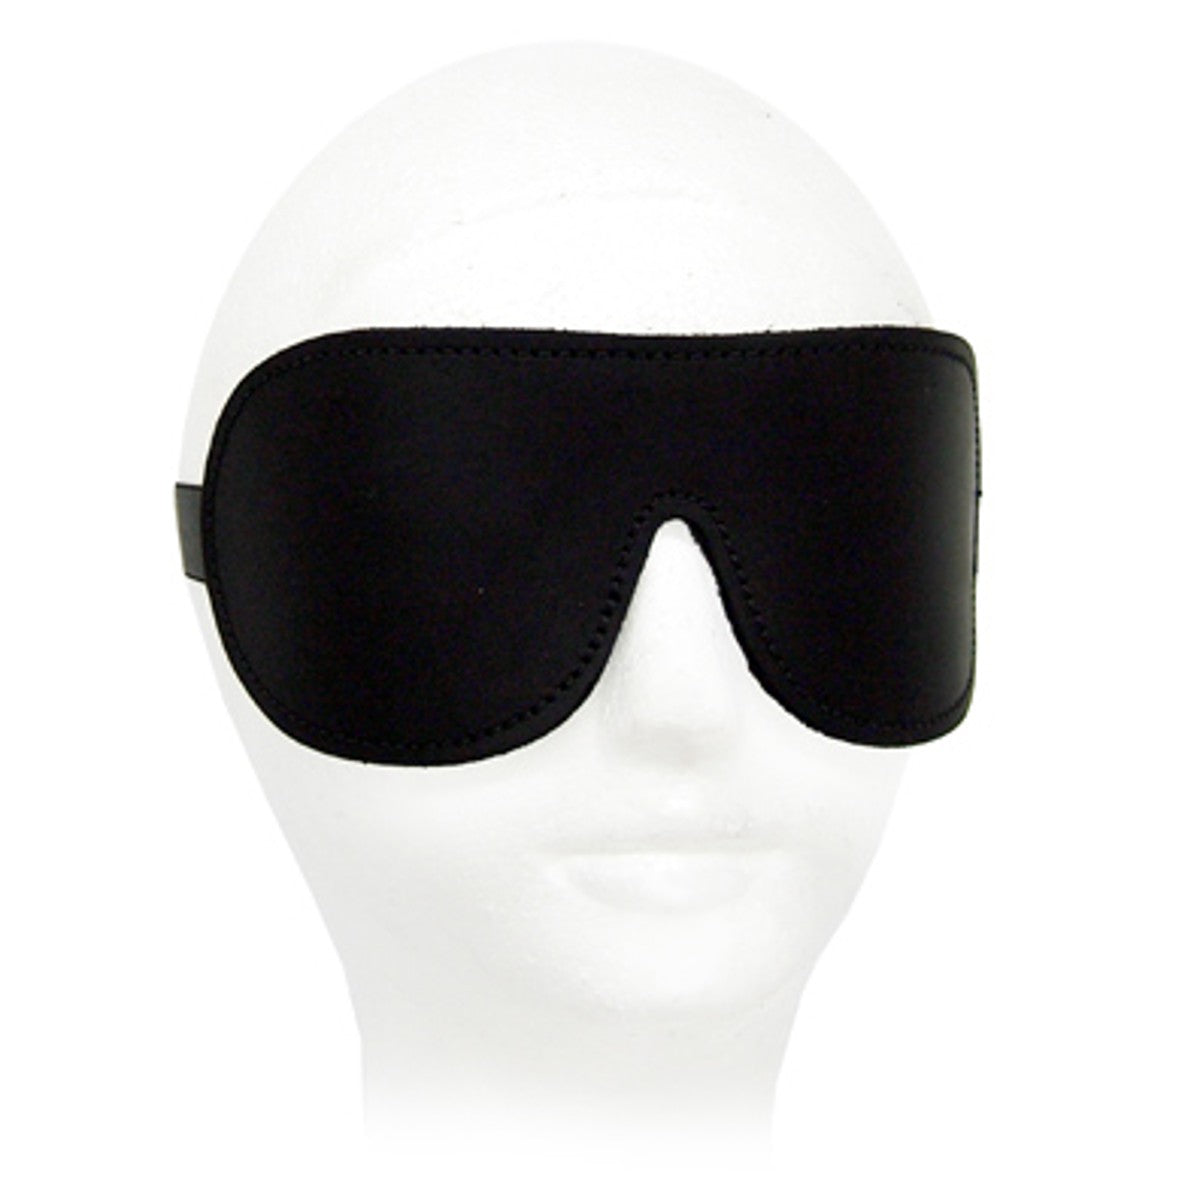 A luxurious handmade leather blindfold with the softest fleece that leaves you totally blind - no peeking!